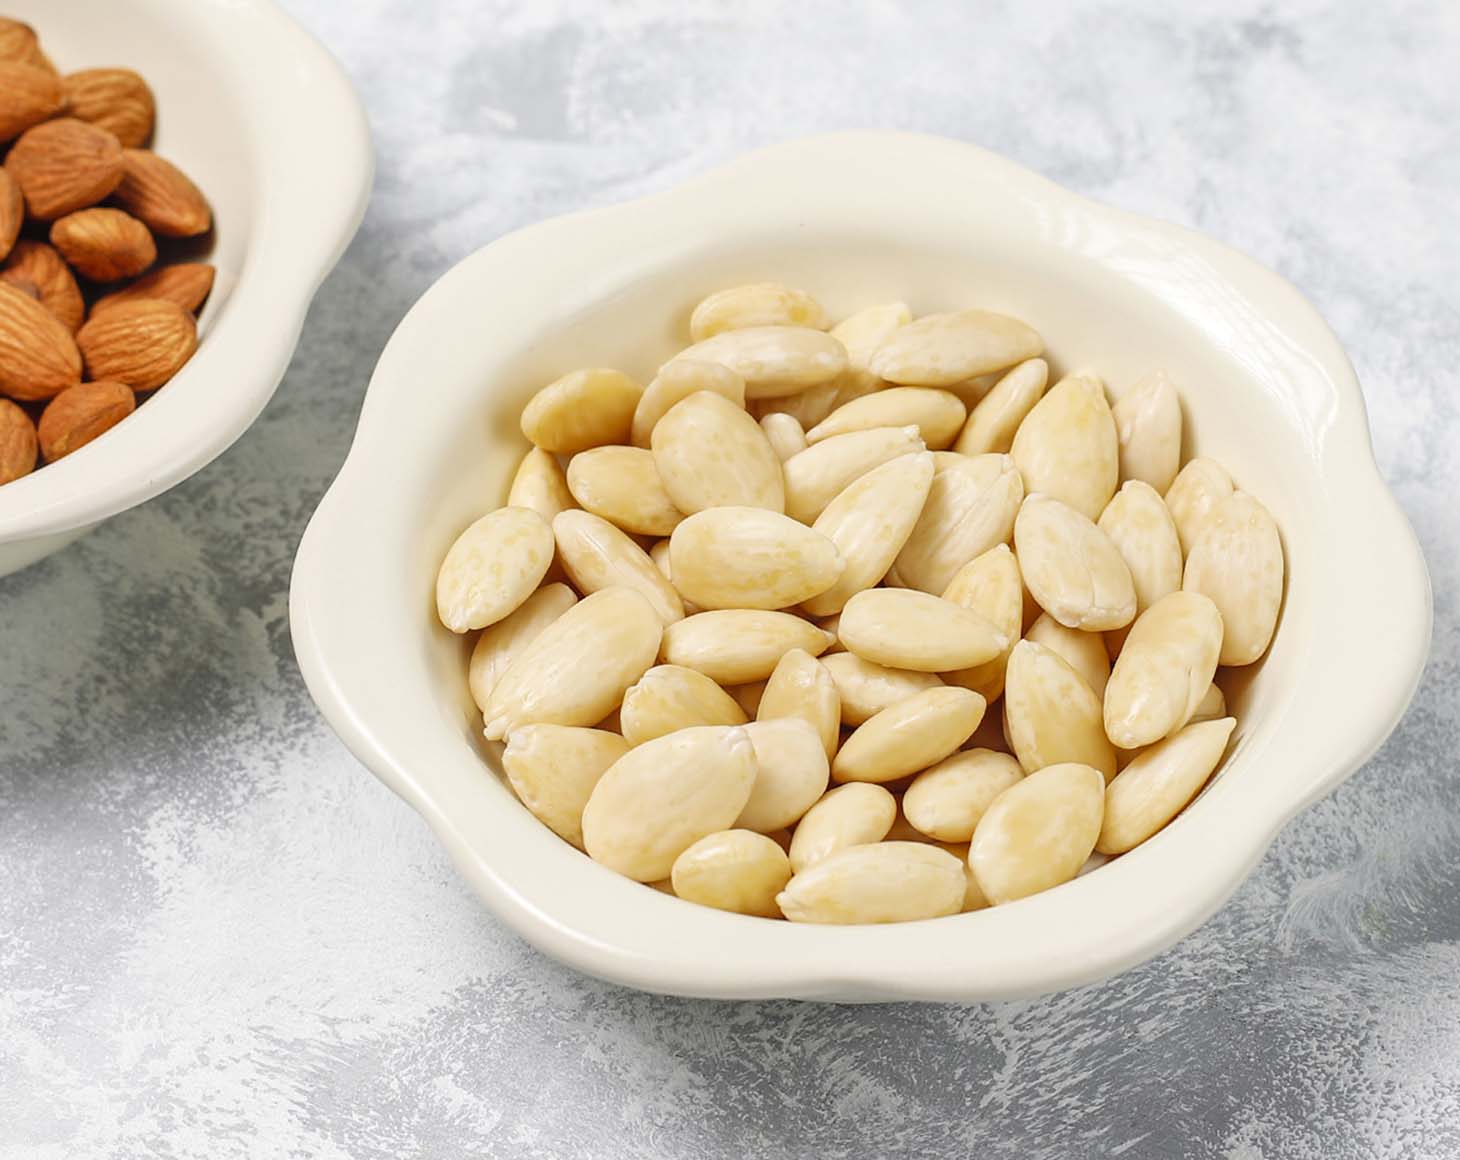 whole-blanched-almonds